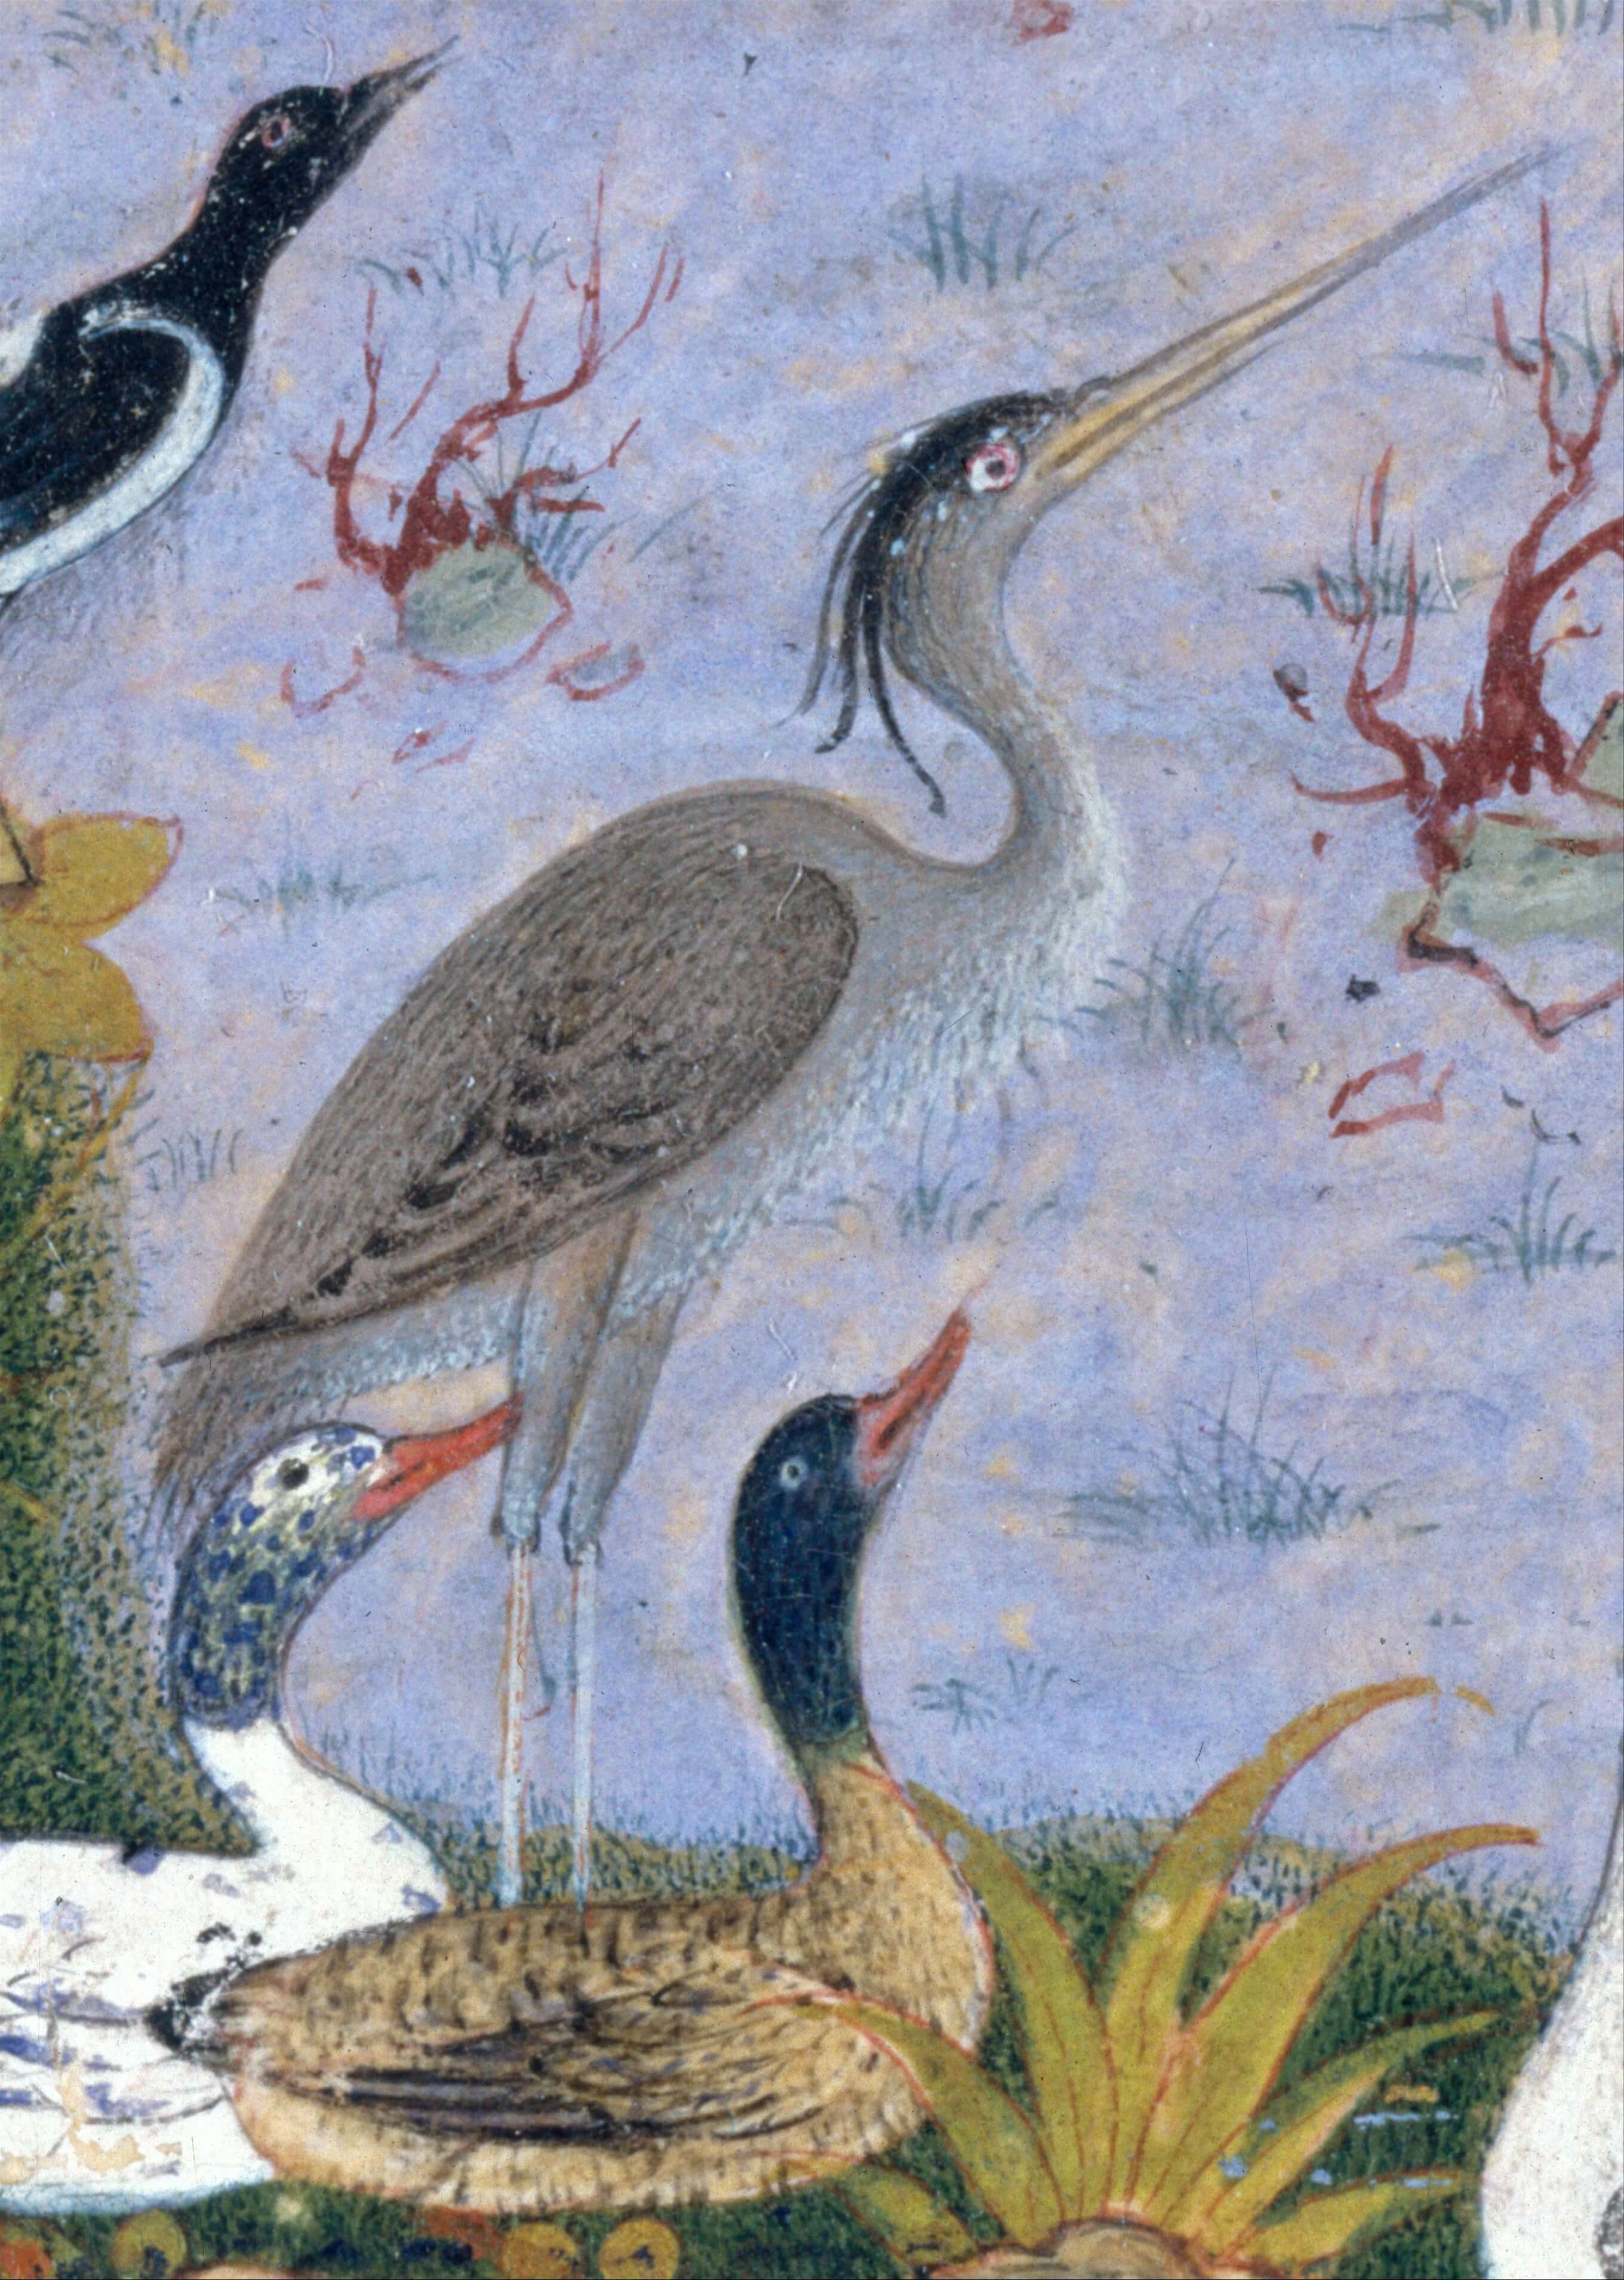 Painting of a crane